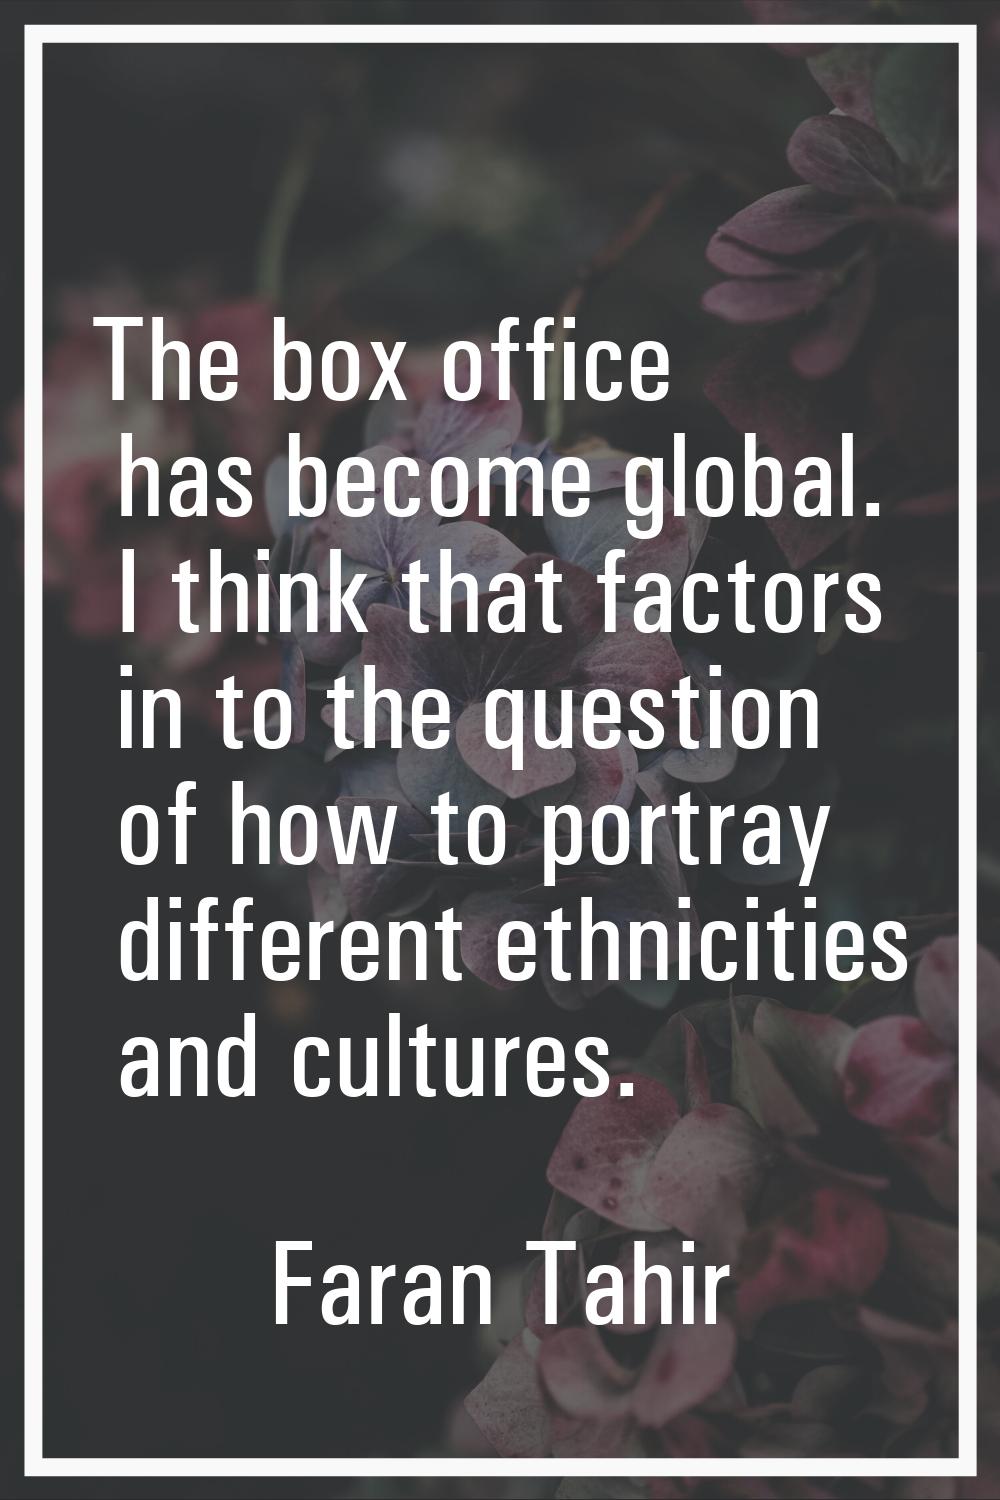 The box office has become global. I think that factors in to the question of how to portray differe